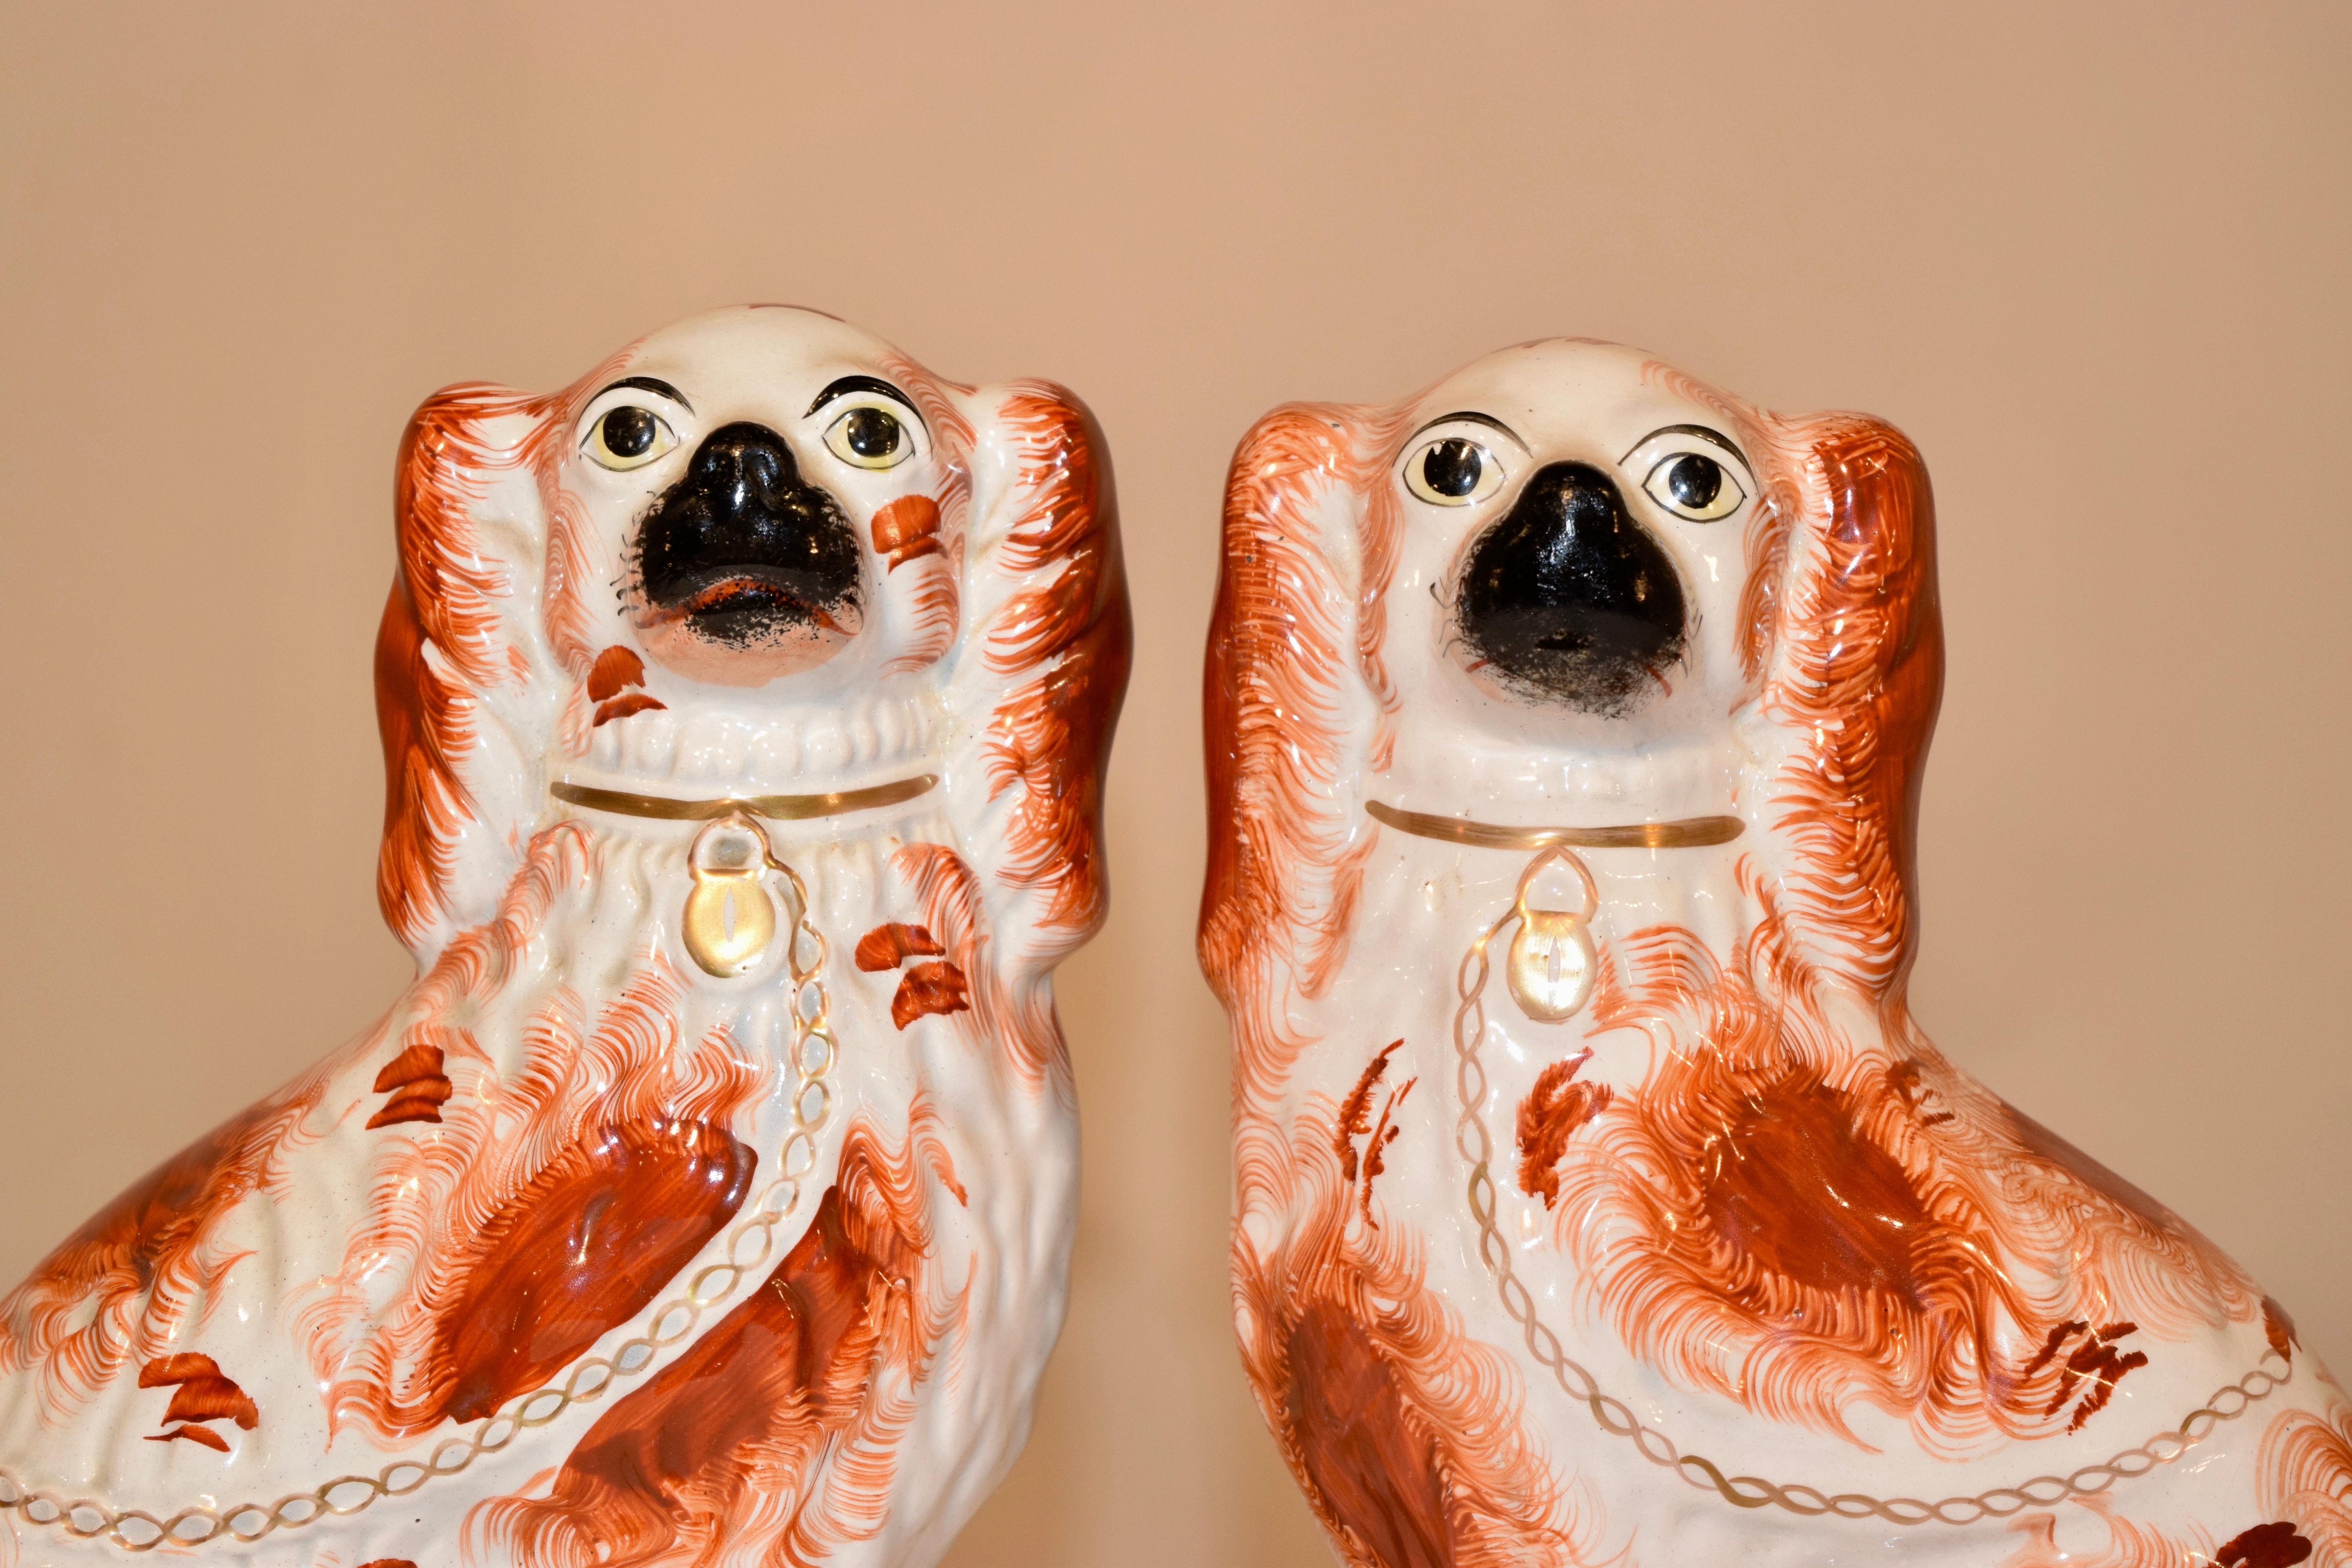 19th century pair of Victorian Staffordshire spaniels in rust and white from England. They have black muzzles and wonderfully expressive faces.